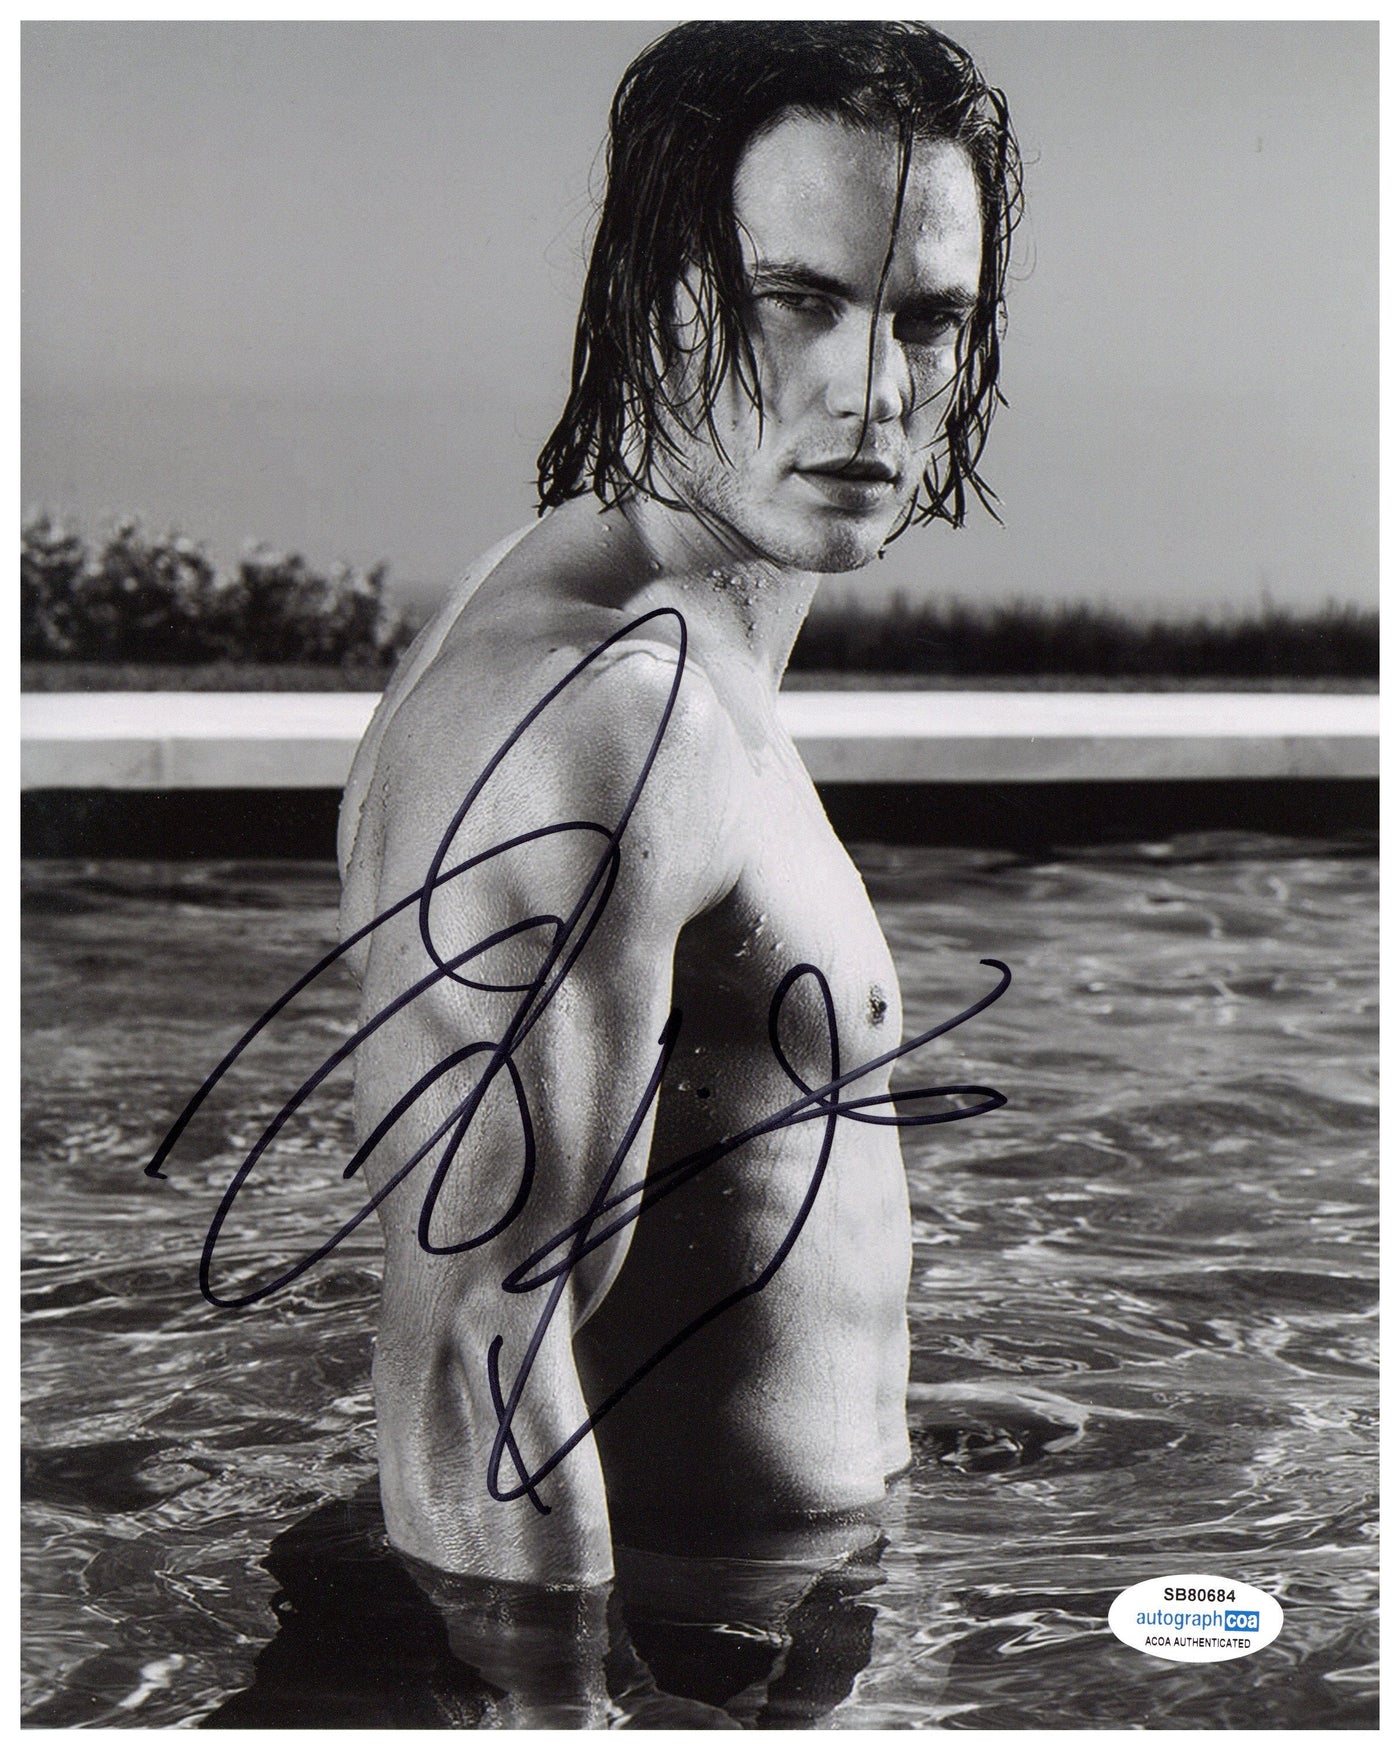 Taylor Kitsch Signed 8x10 Photo Authentic Autographed ACOA